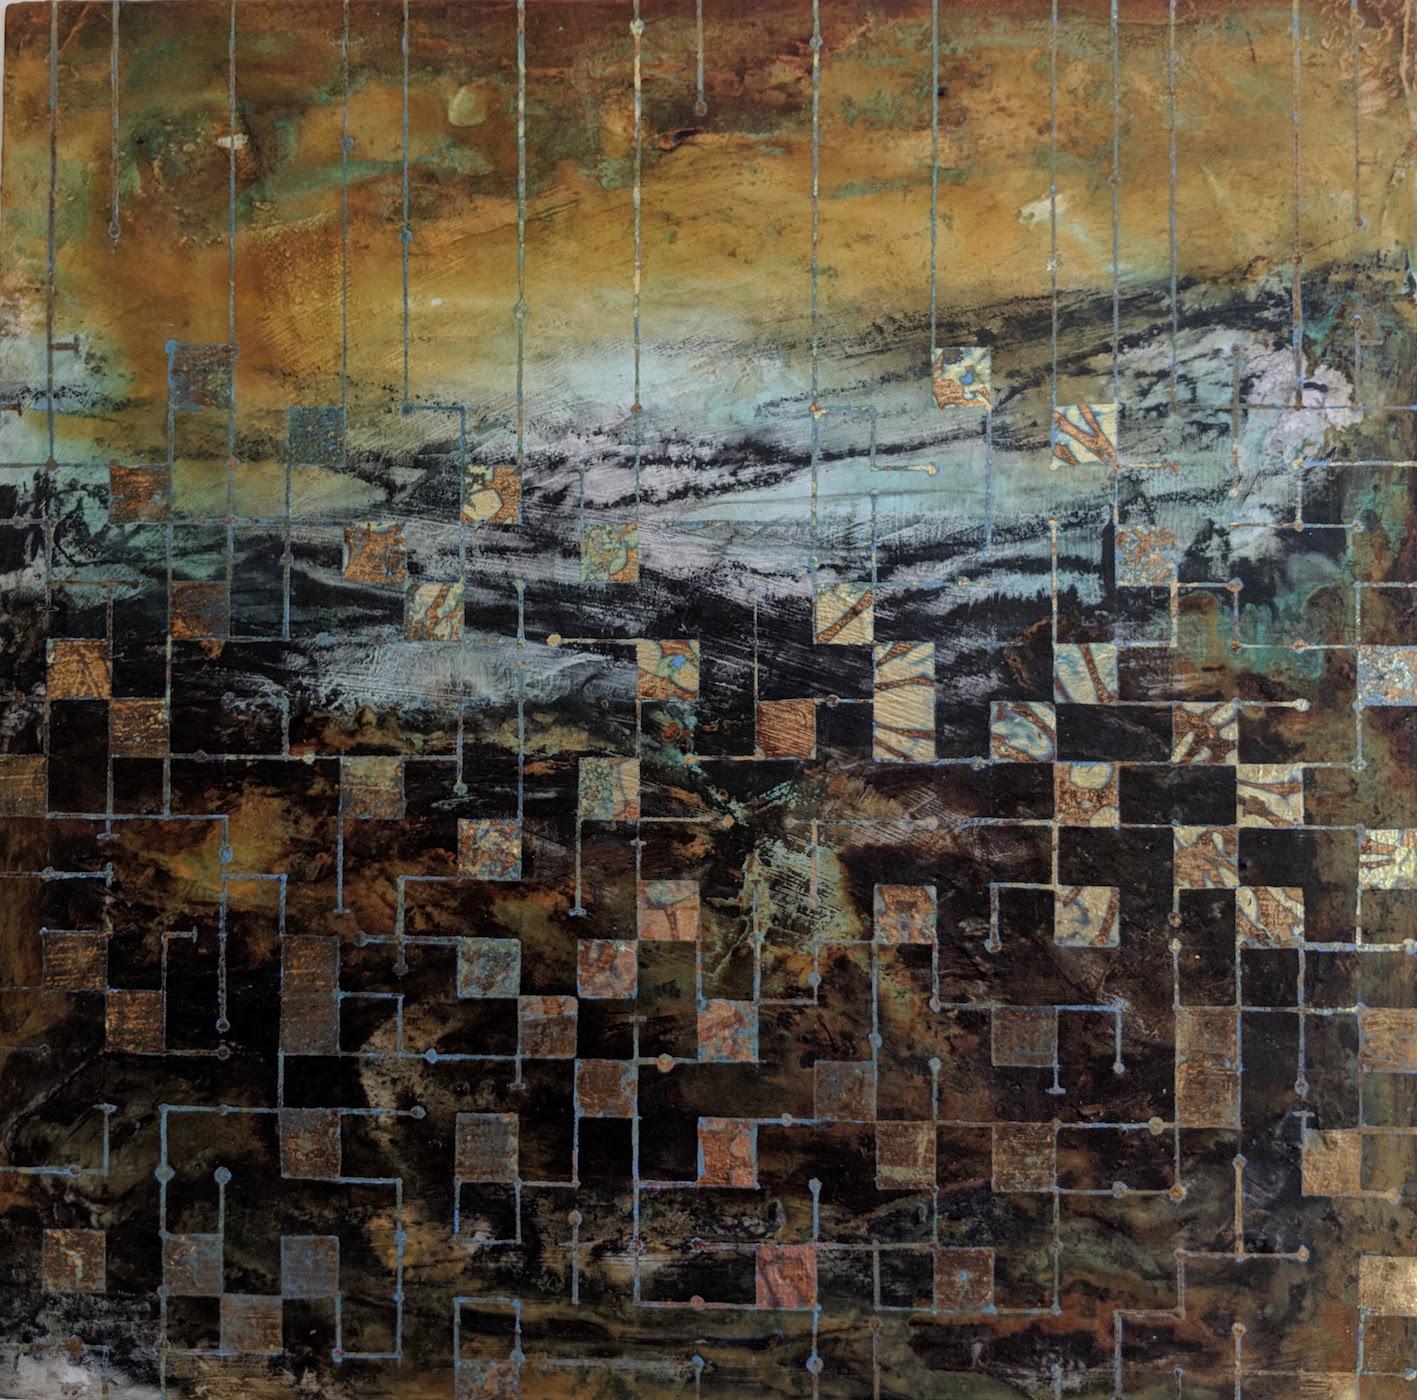 Lorraine Thorne Landscape Painting – Grids of communication, a mixed media painting, abstract art, landscape painting